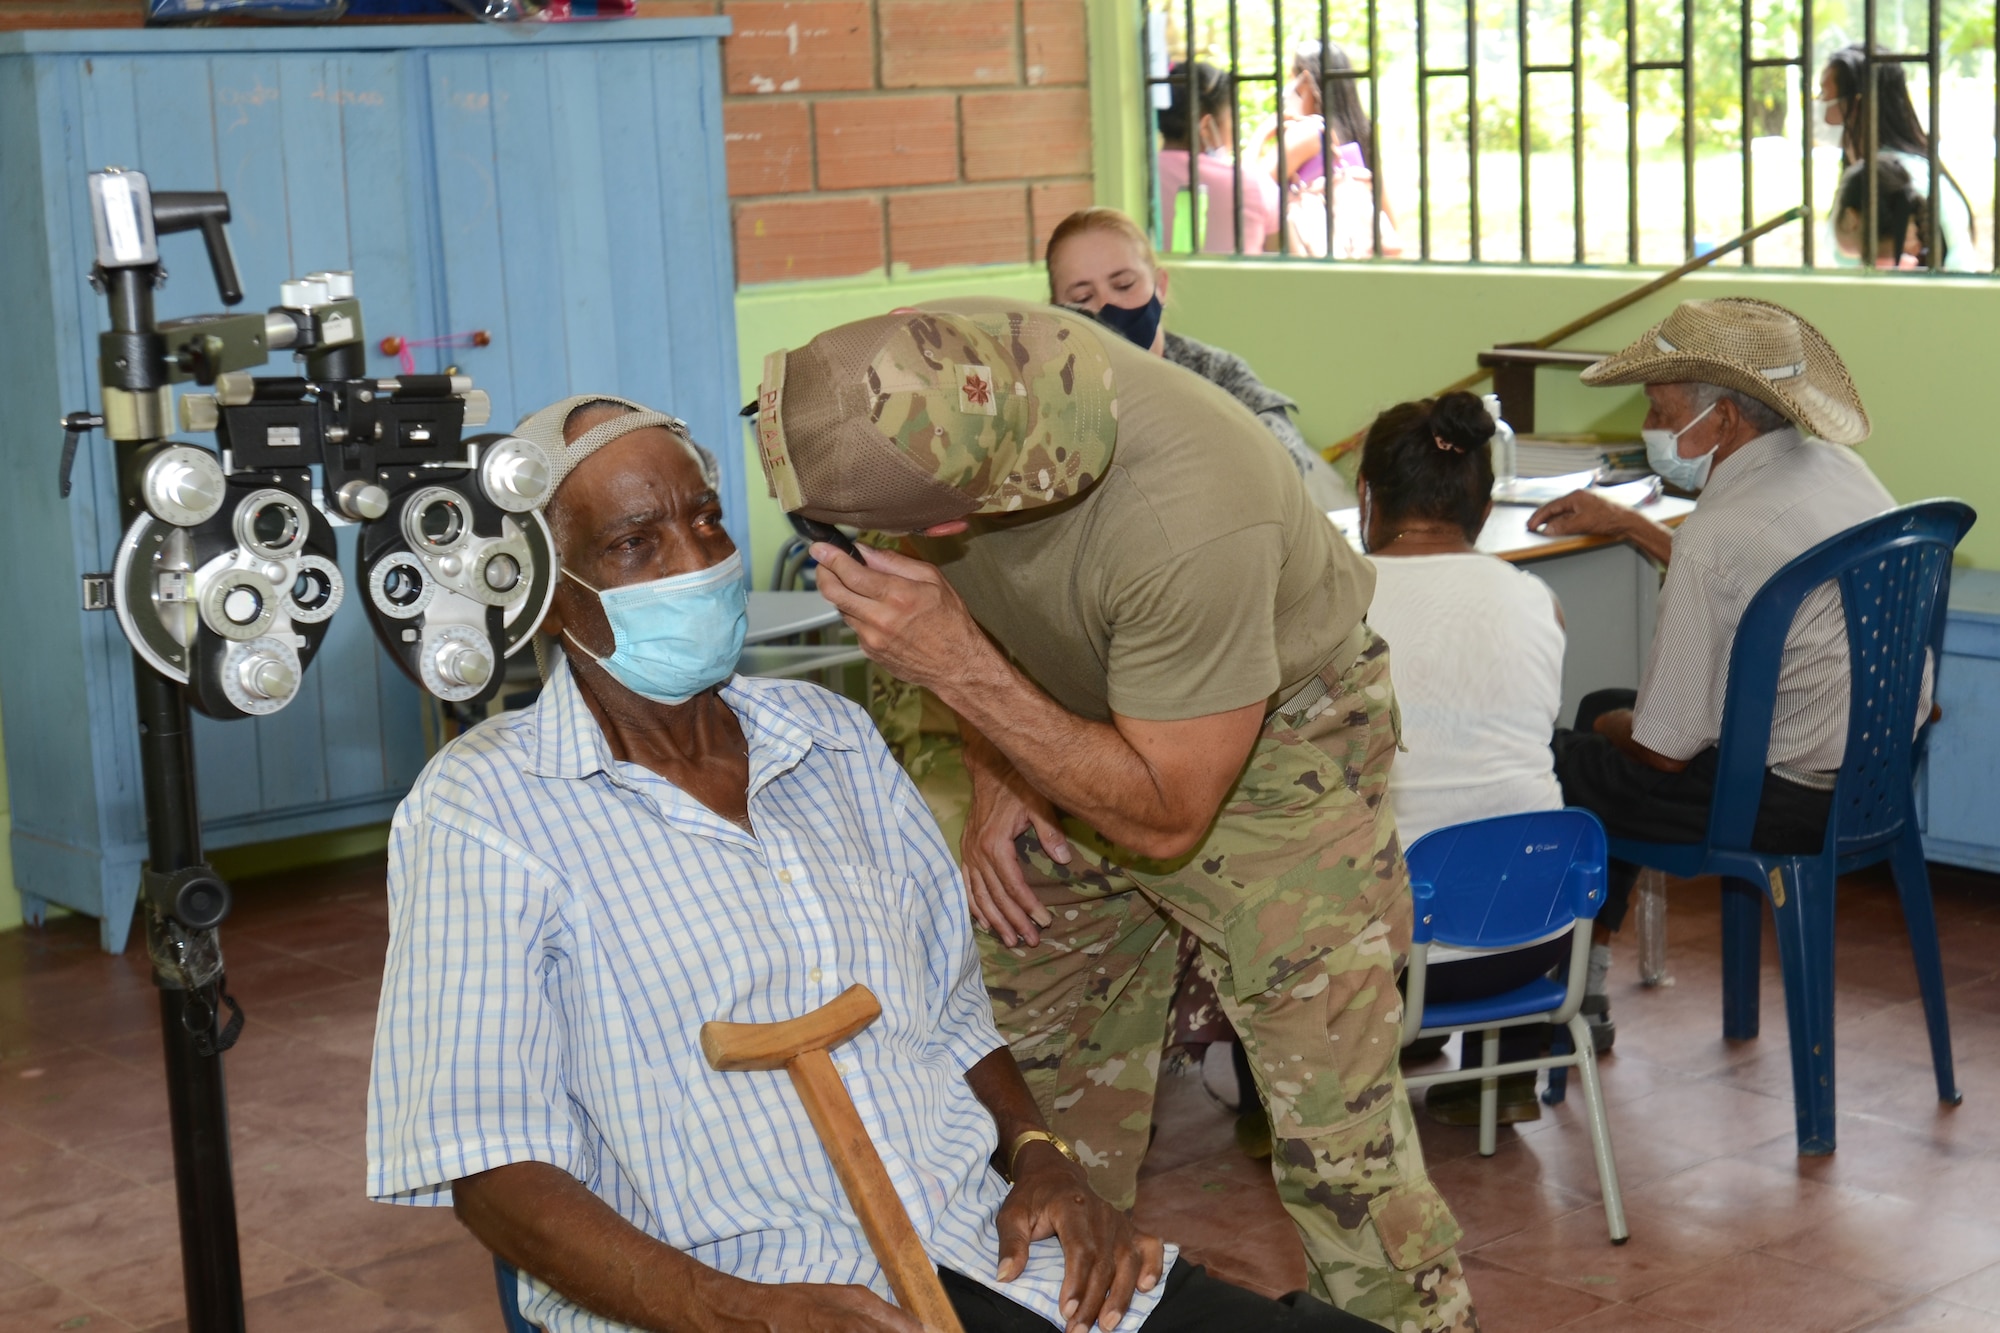 South Carolina Air National Guard Maj. Sean Pitale, a doctor with the 169th Medical Group, examines a Colombian patient Sept. 4, 2021. SCNG medical personnel provided medical care to more than 300 people in the remote town of Tamana, Colombia, as part of exercises with its State Partnership Program partner Colombia Aug. 30 to Sept. 10, 2021.